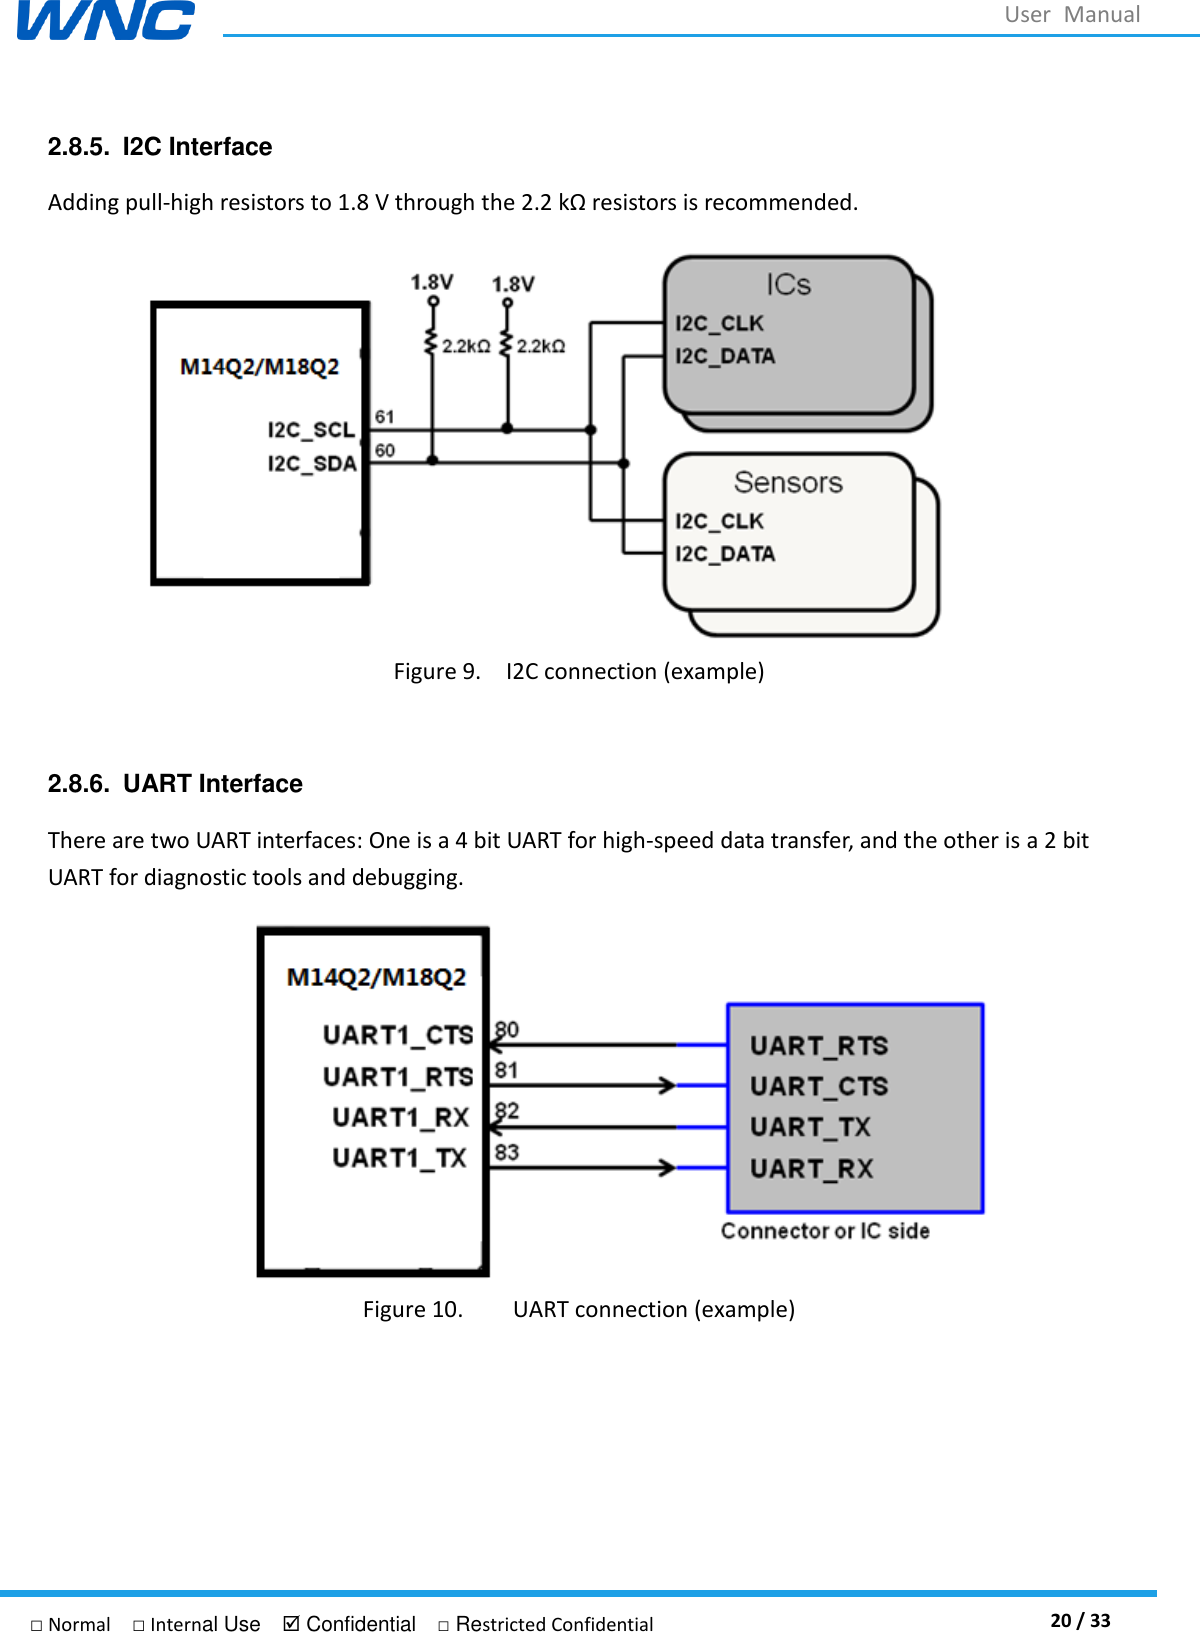  20 / 33 □ Normal  □ Internal Use   Confidential  □ Restricted Confidential User  Manual 2.8.5.  I2C Interface Adding pull-high resistors to 1.8 V through the 2.2 kΩ resistors is recommended.  Figure 9.   I2C connection (example)  2.8.6.  UART Interface There are two UART interfaces: One is a 4 bit UART for high-speed data transfer, and the other is a 2 bit UART for diagnostic tools and debugging.    Figure 10. UART connection (example)    